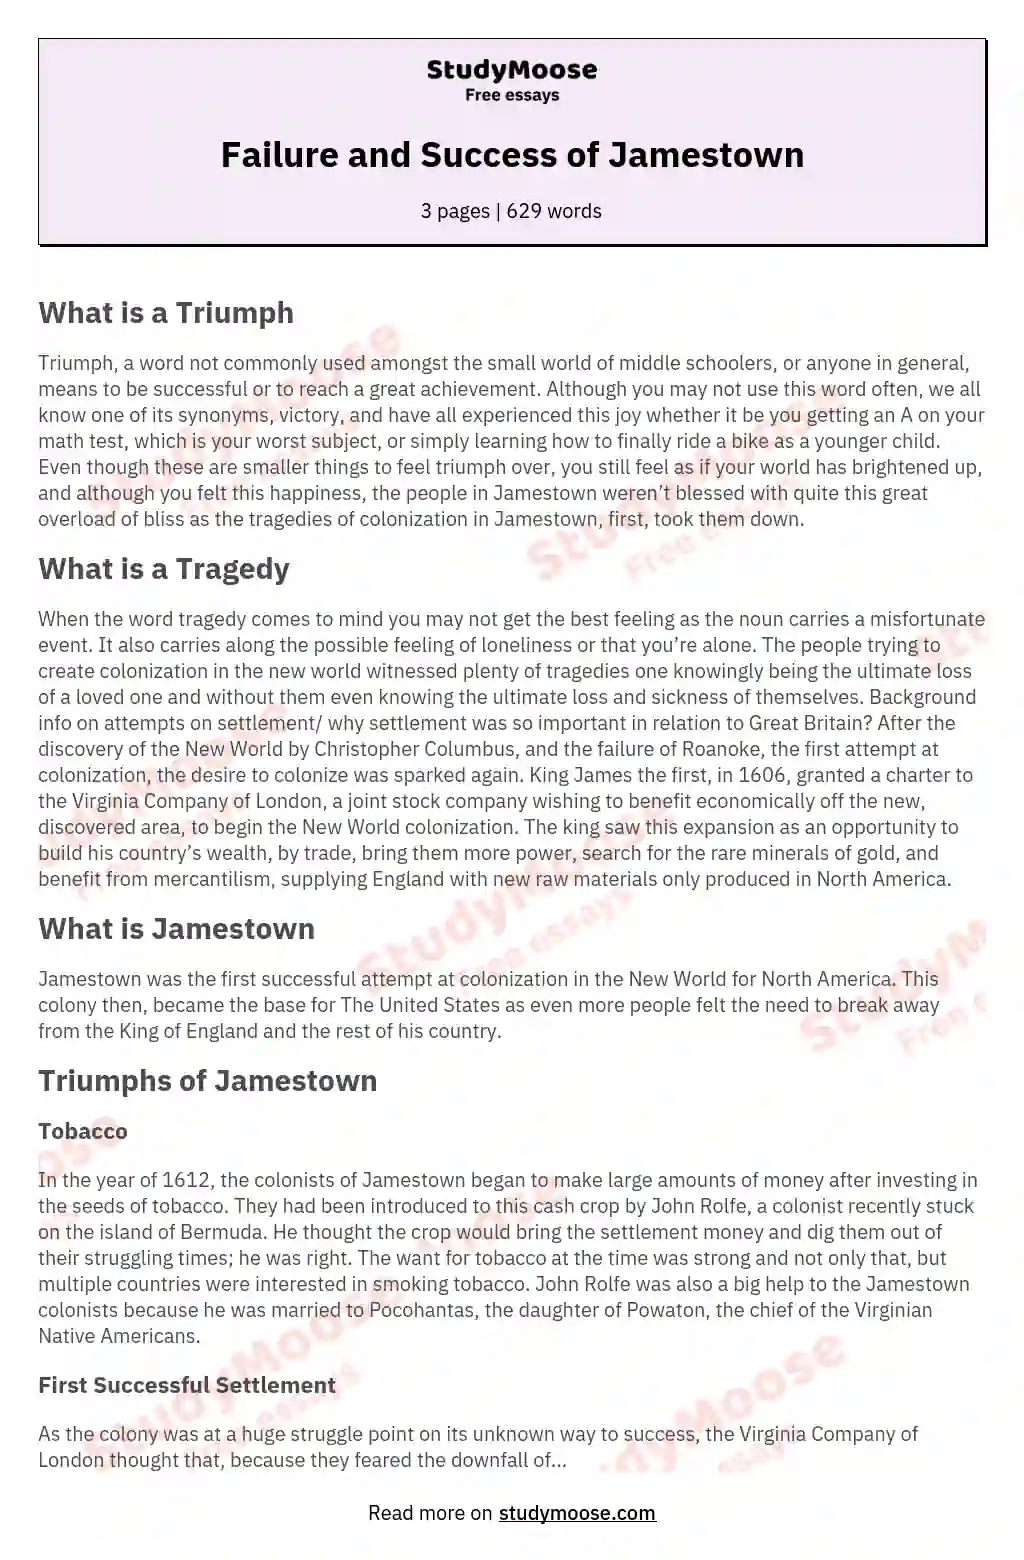 Failure and Success of Jamestown essay